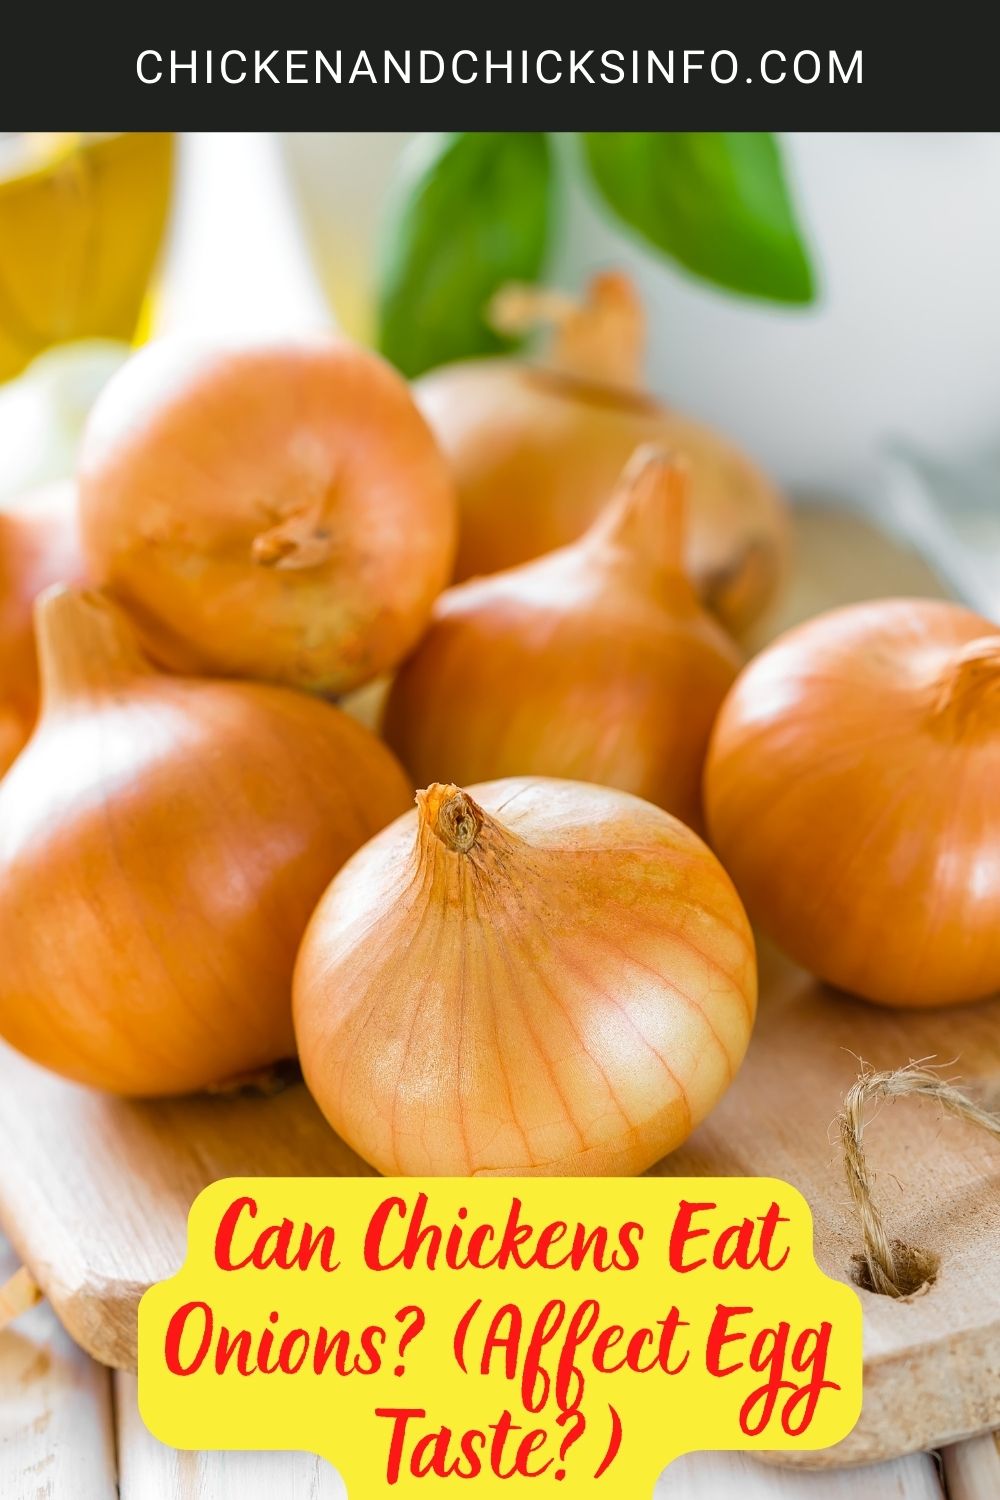 Can Chickens Eat Onions? (Affect Egg Taste?) poster.
